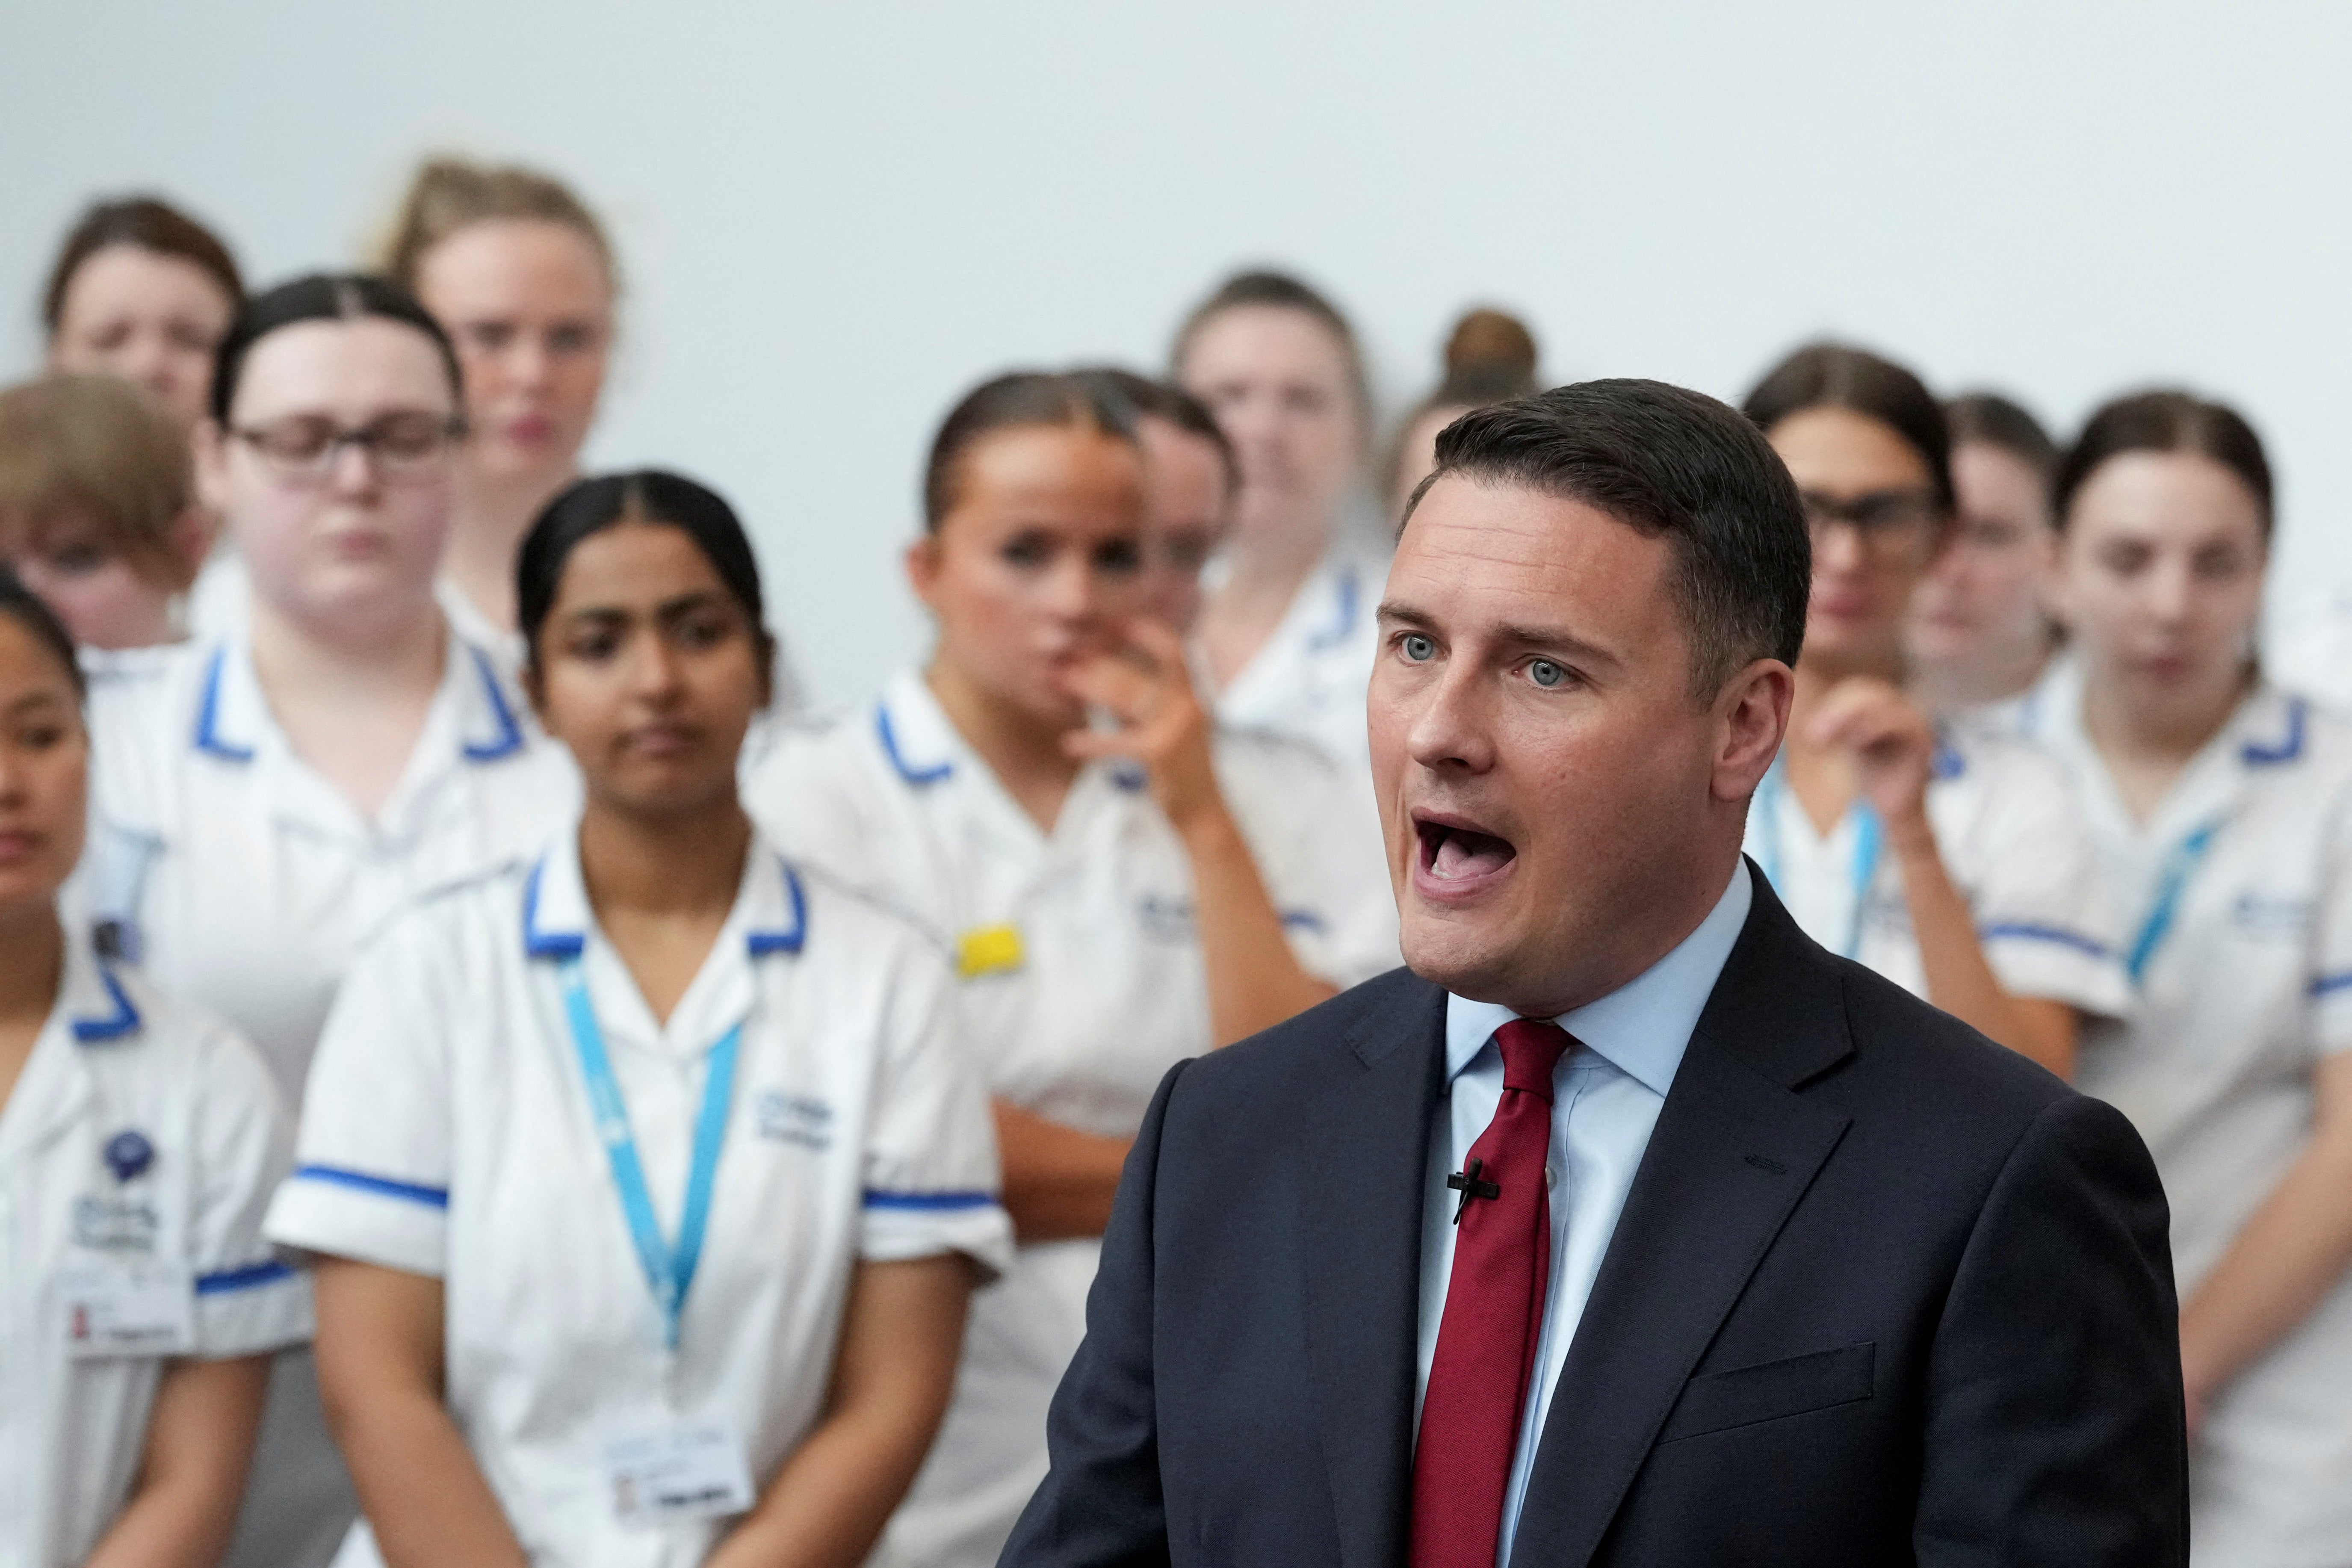 Shadow Secretary of State for Health and Social Care Wes Streeting speaks during a Labour general election campaign event in Worcester